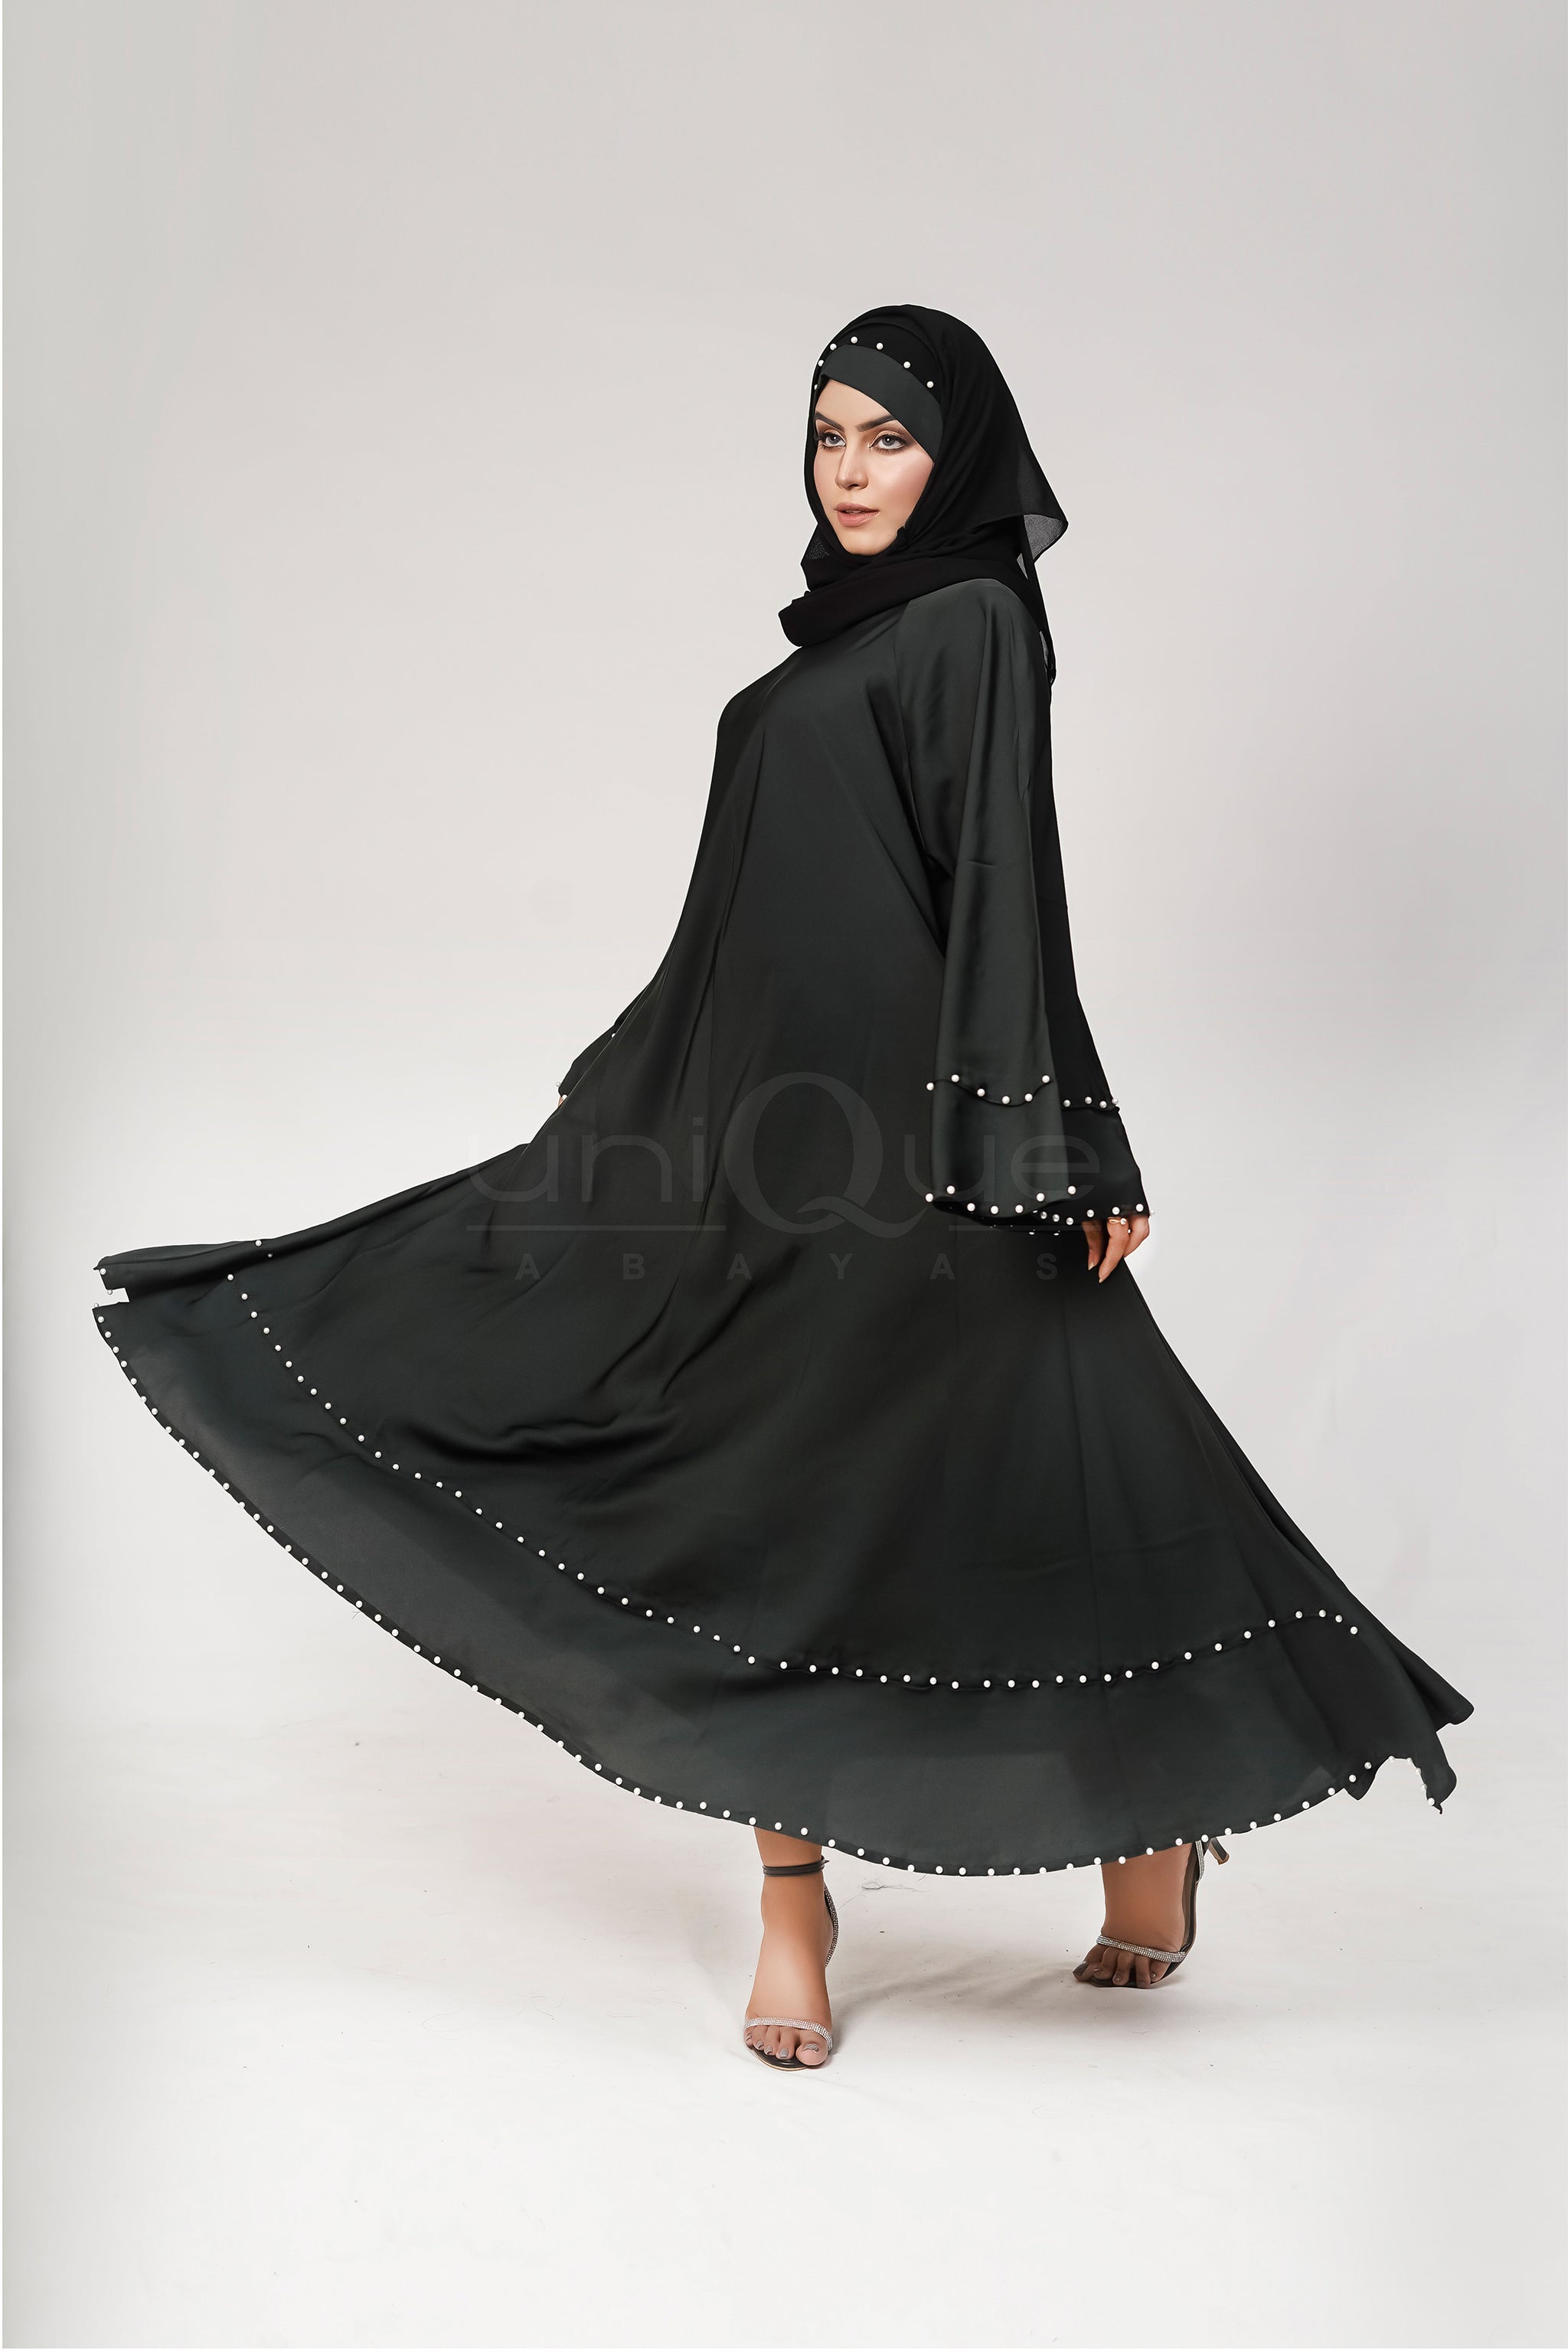 Pearl Umbrella Green Abaya by Uniquewallart Abaya for Women, Front Side Detailed View